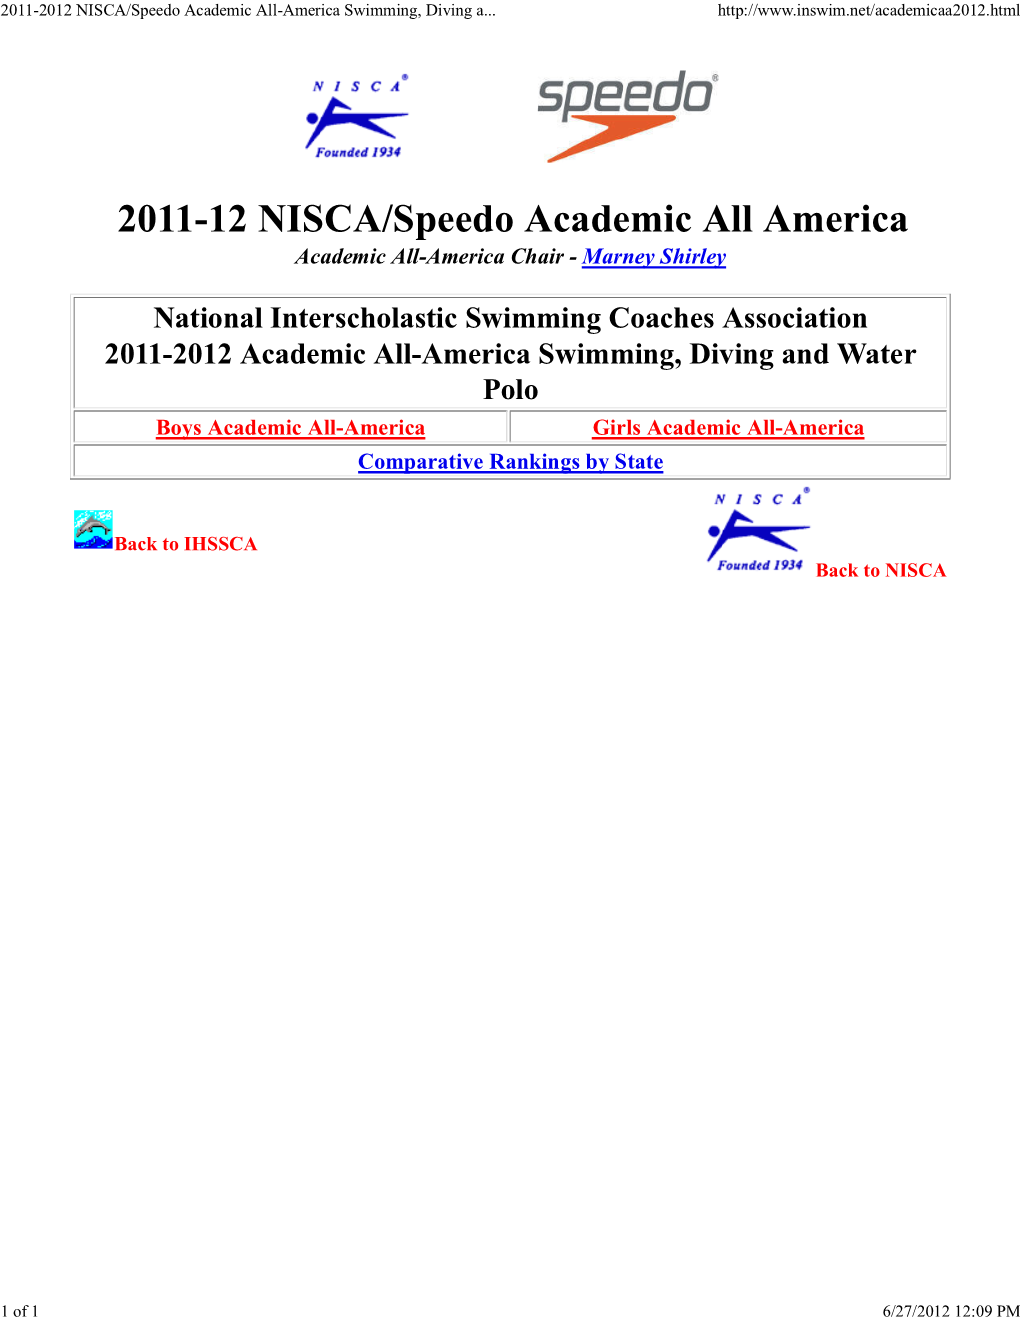 2011-2012 NISCA/Speedo Academic All-America Swimming, Diving And